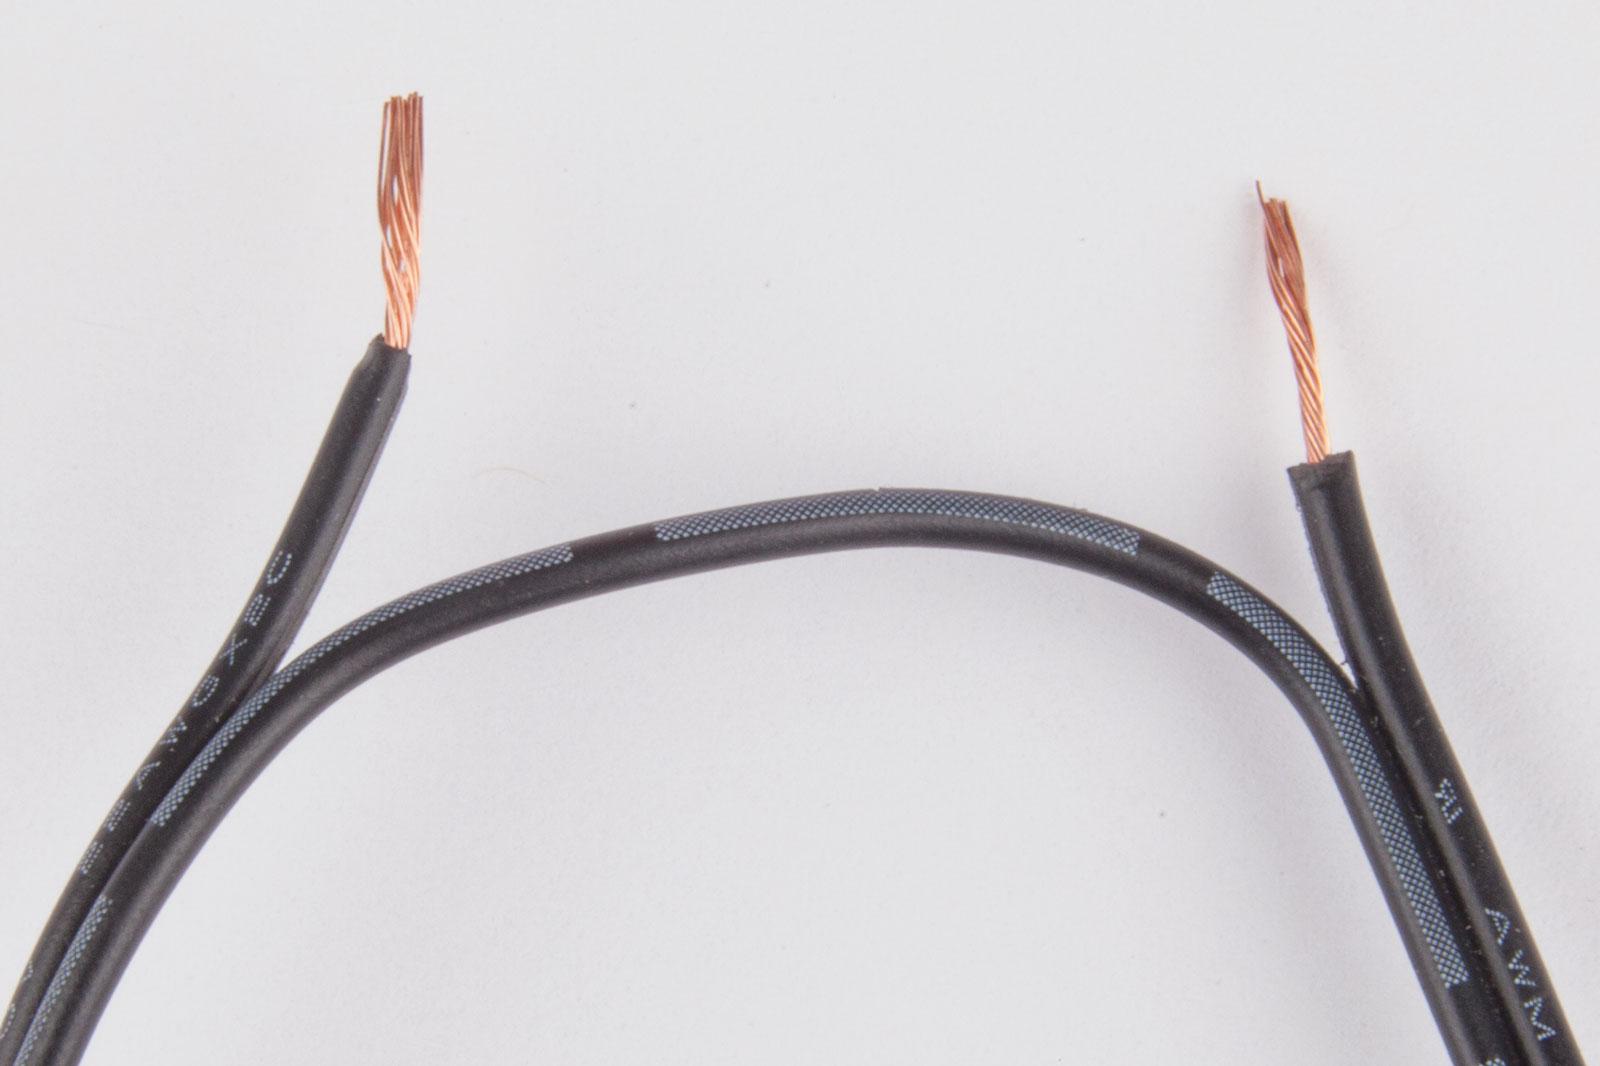 The DC cable after being cut